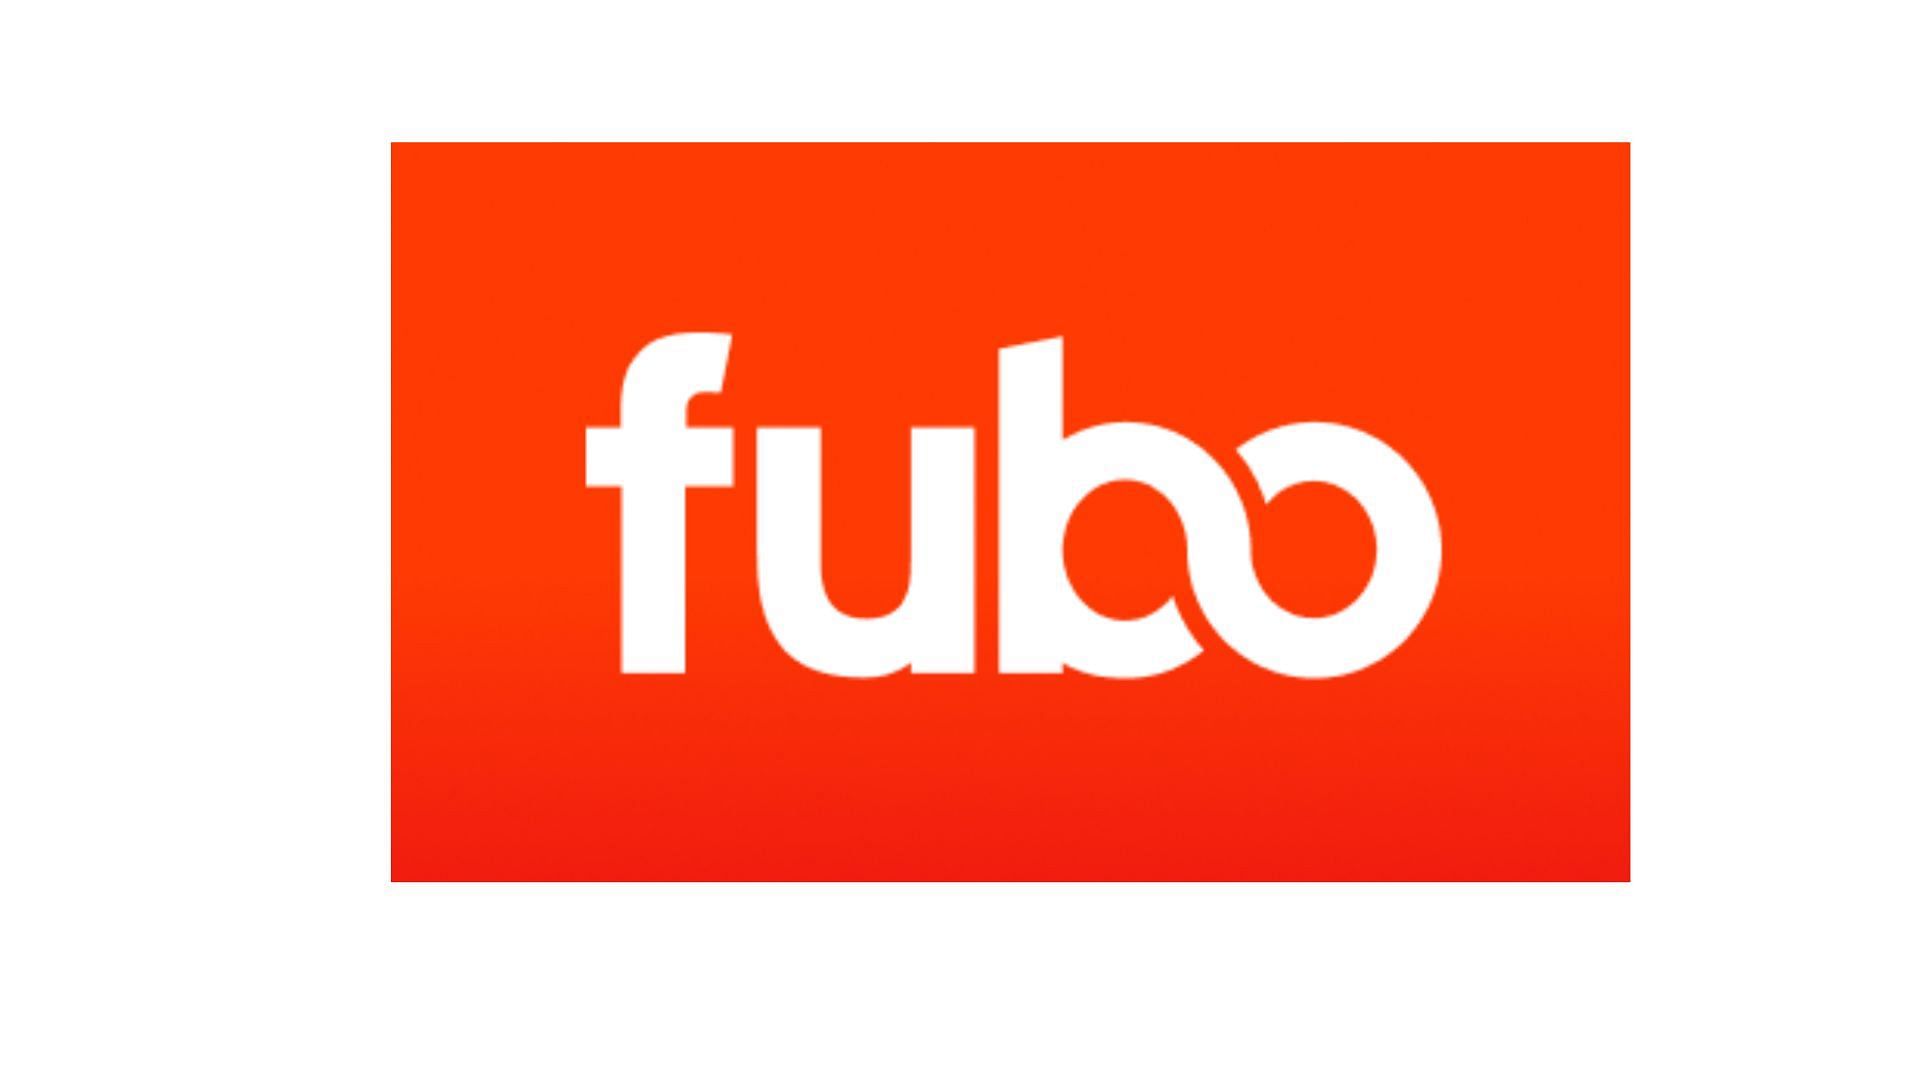 Fubo Tv also streams the MLB Network for its viewers